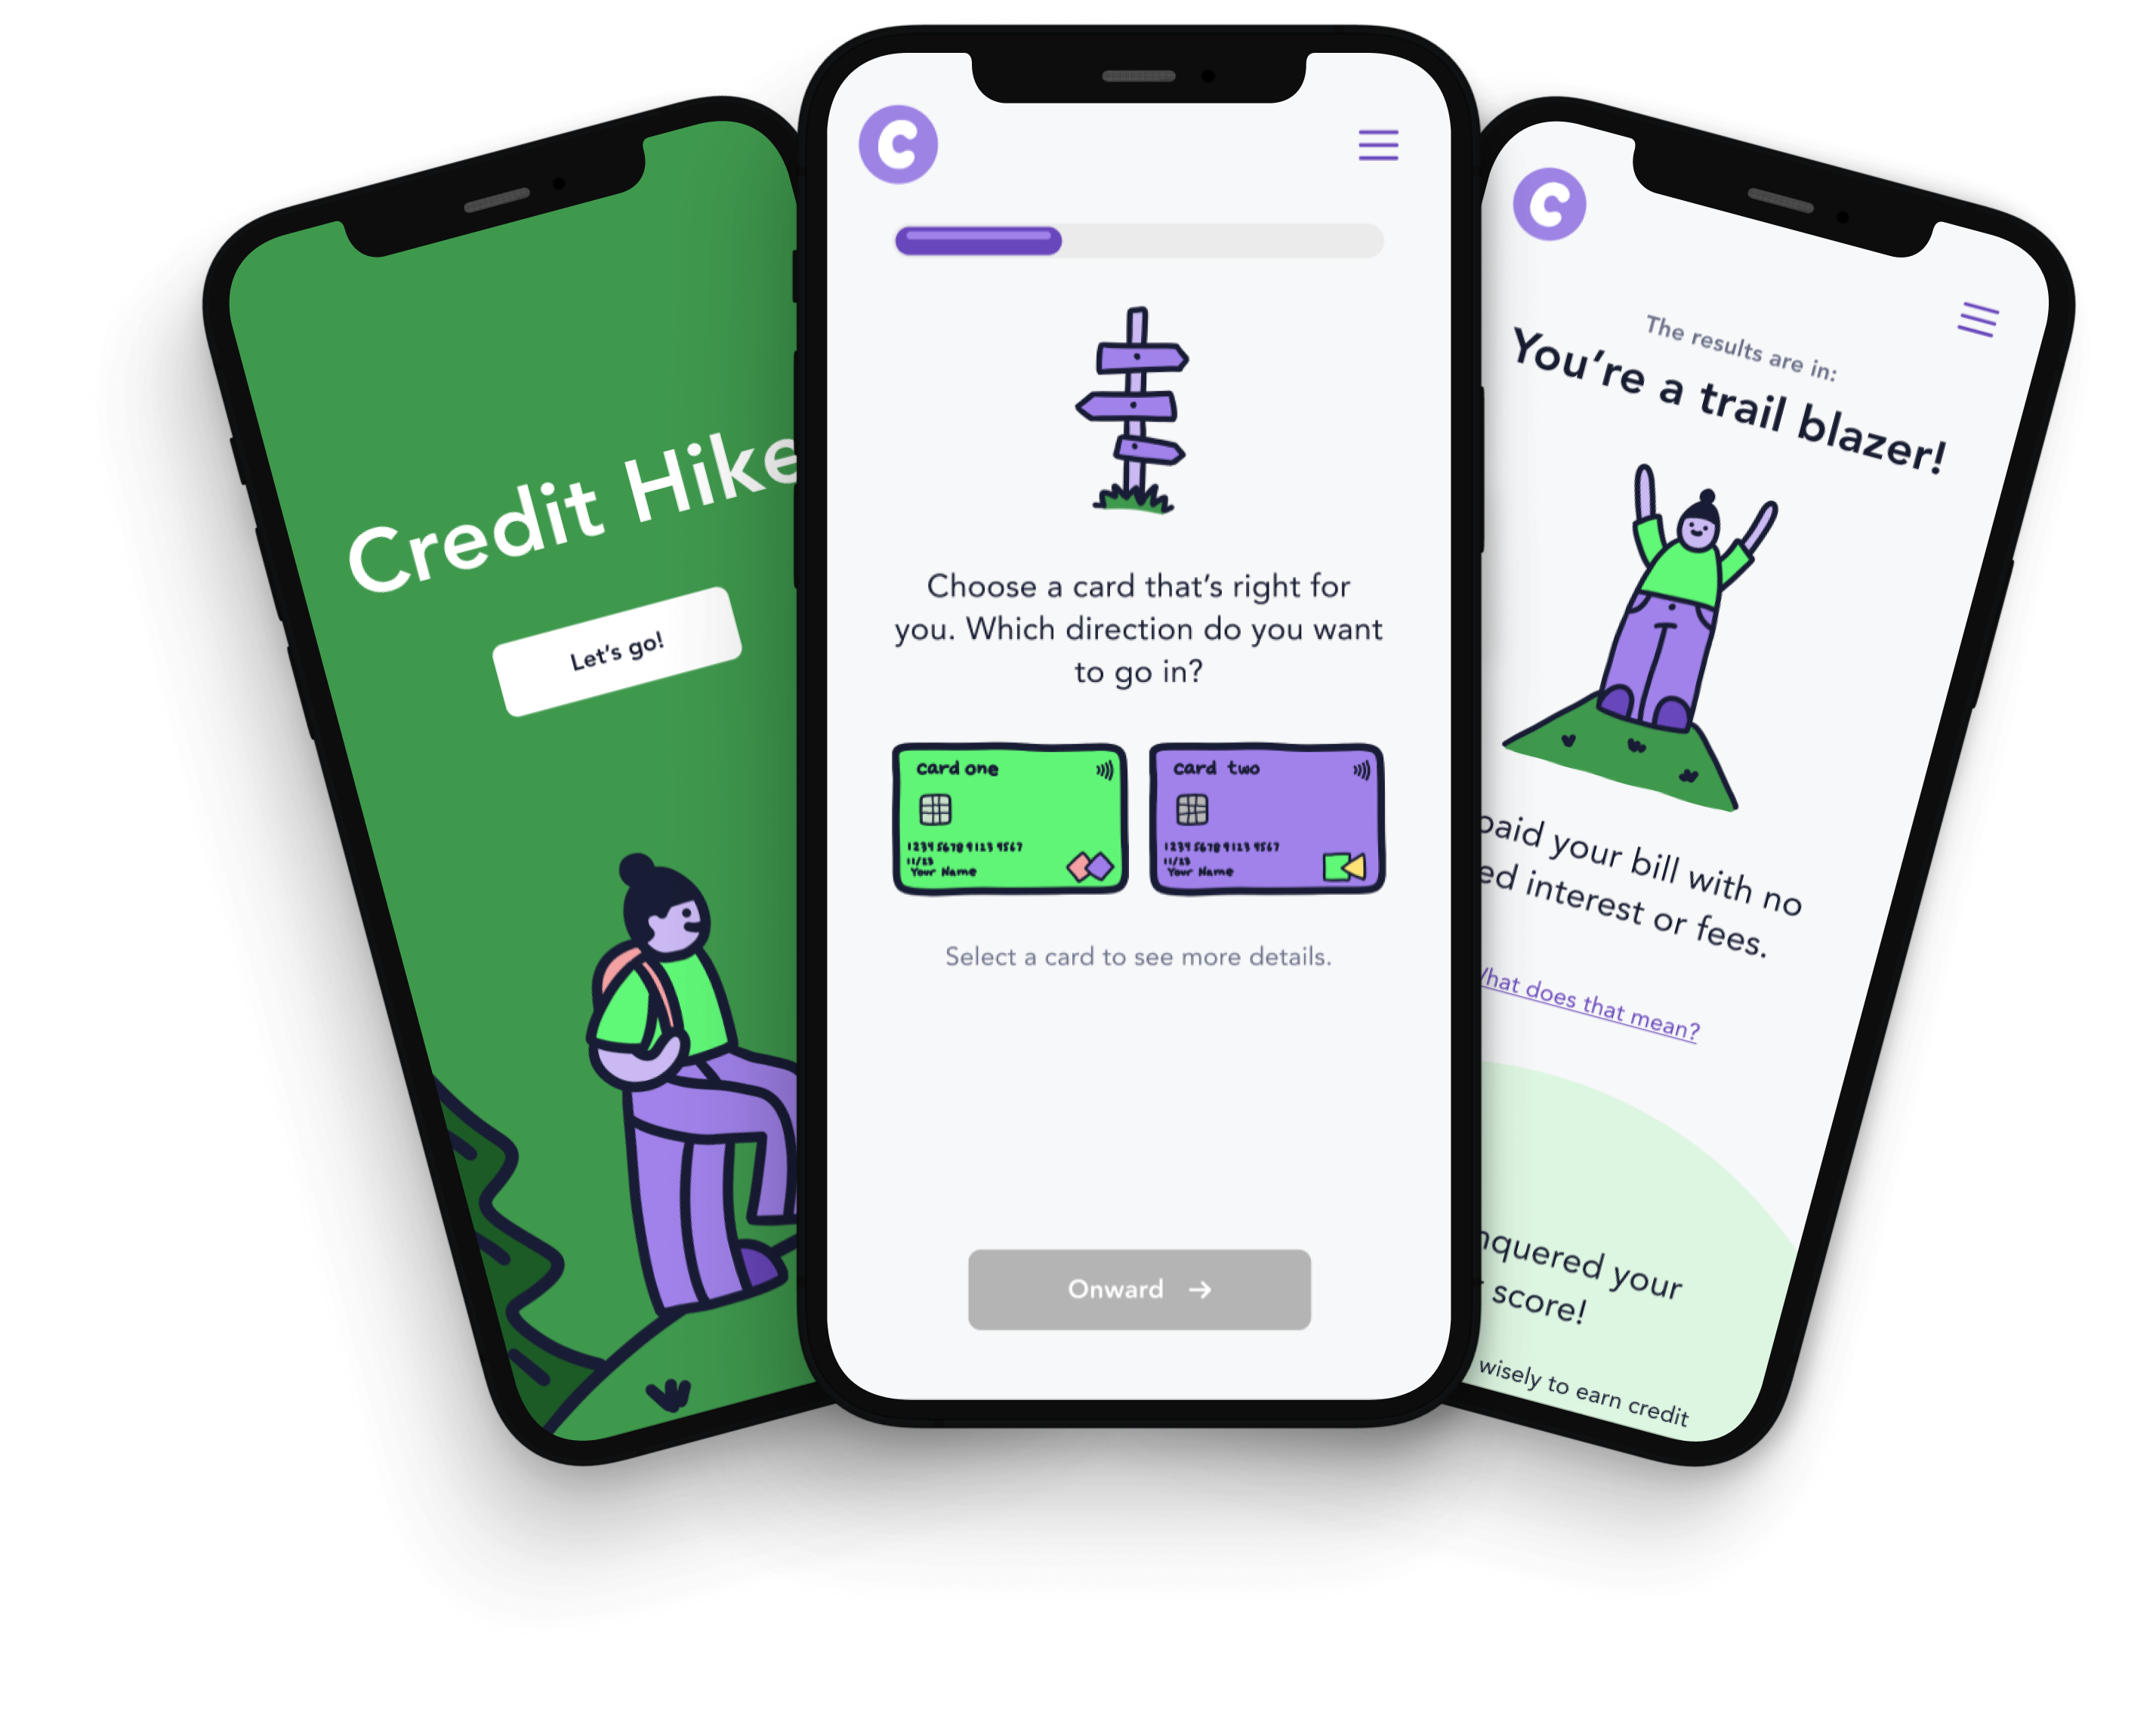 A prototype of the mobile interface of the Credit Hike app.